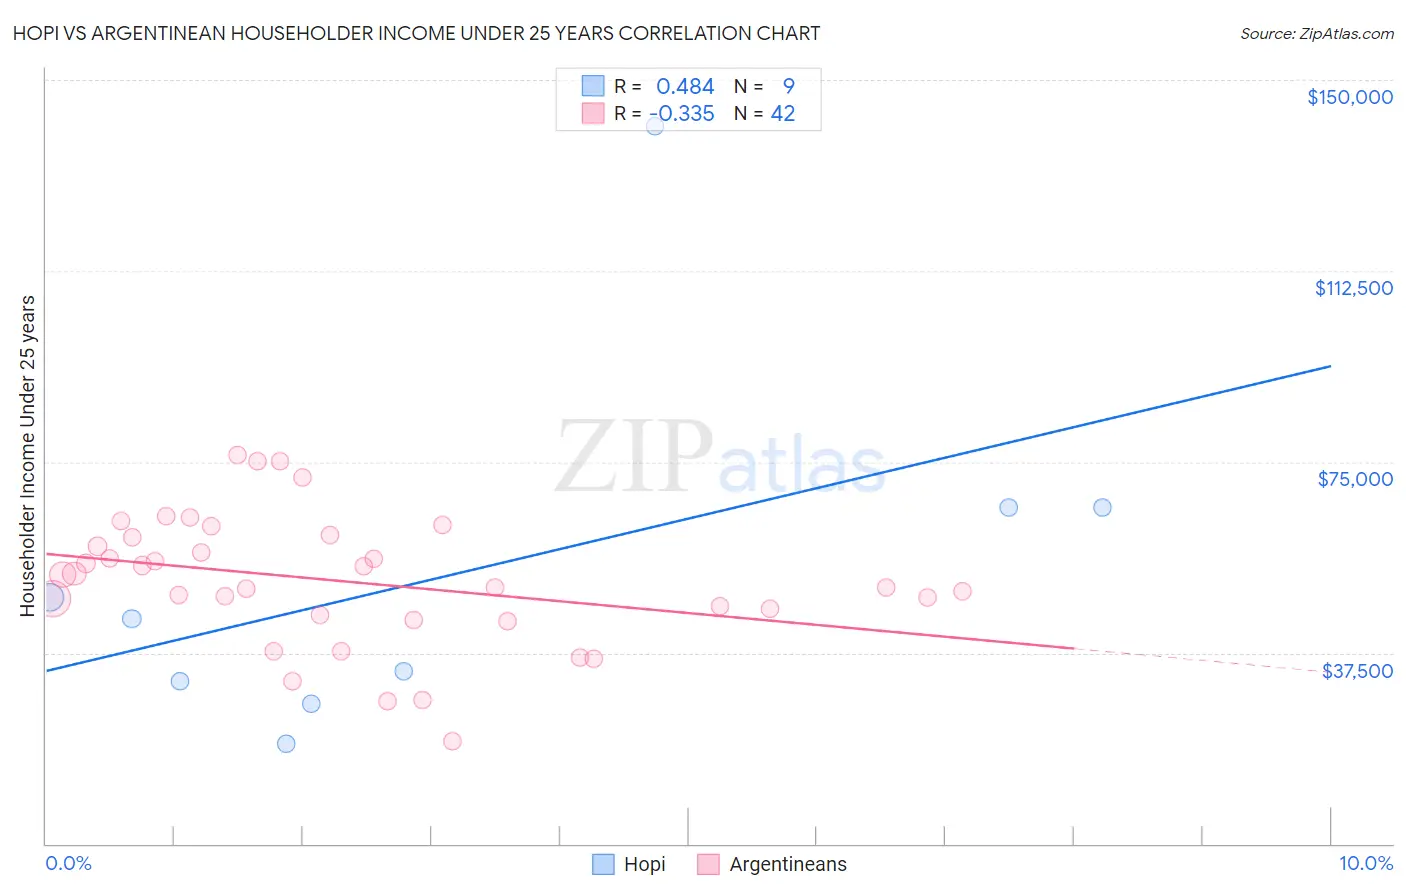 Hopi vs Argentinean Householder Income Under 25 years